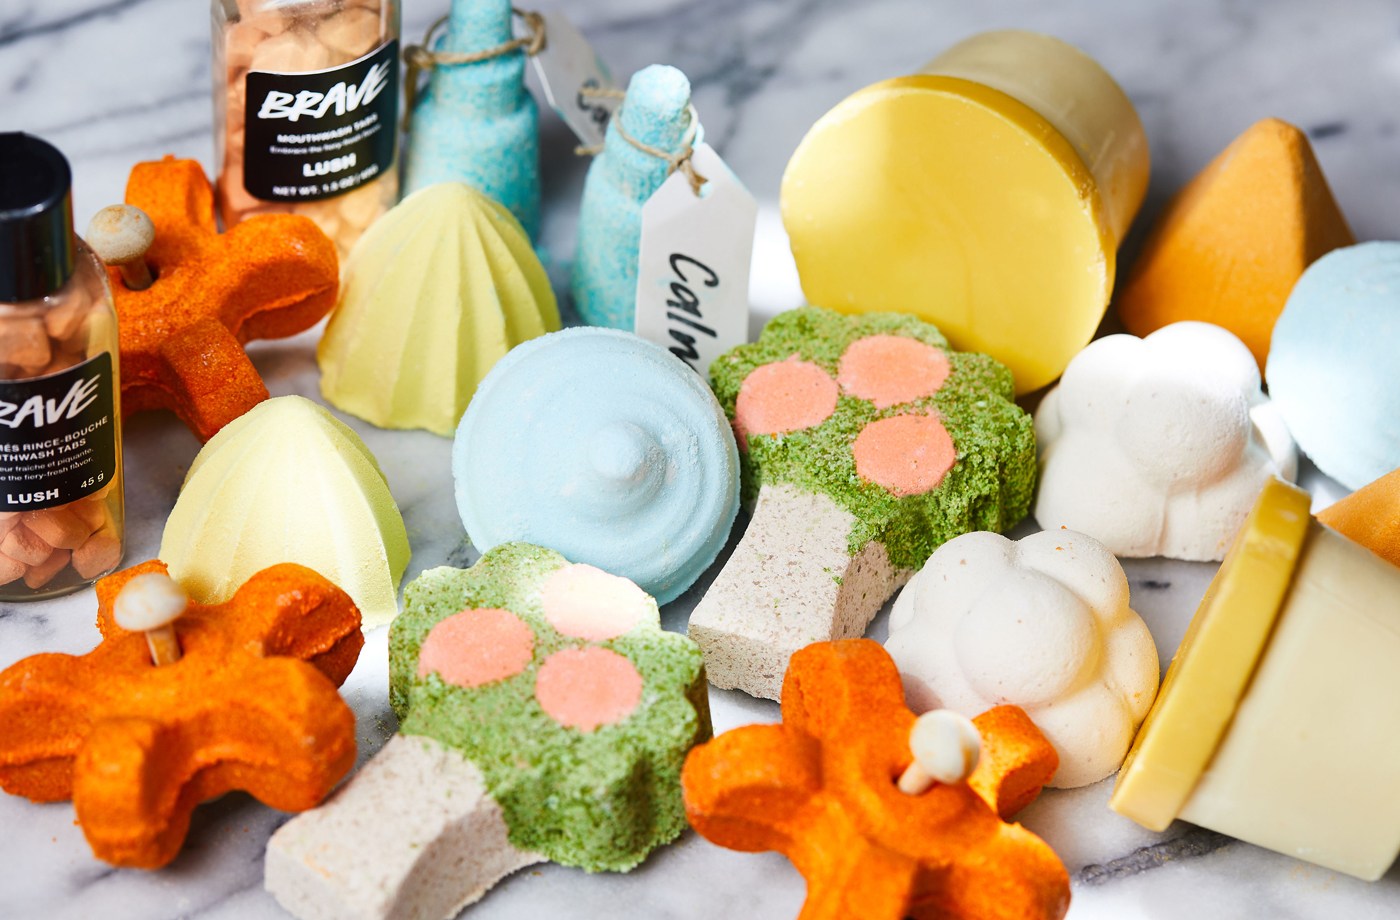 Not a bath person, but still want the benefits? Lush's new "shower bombs" have you covered